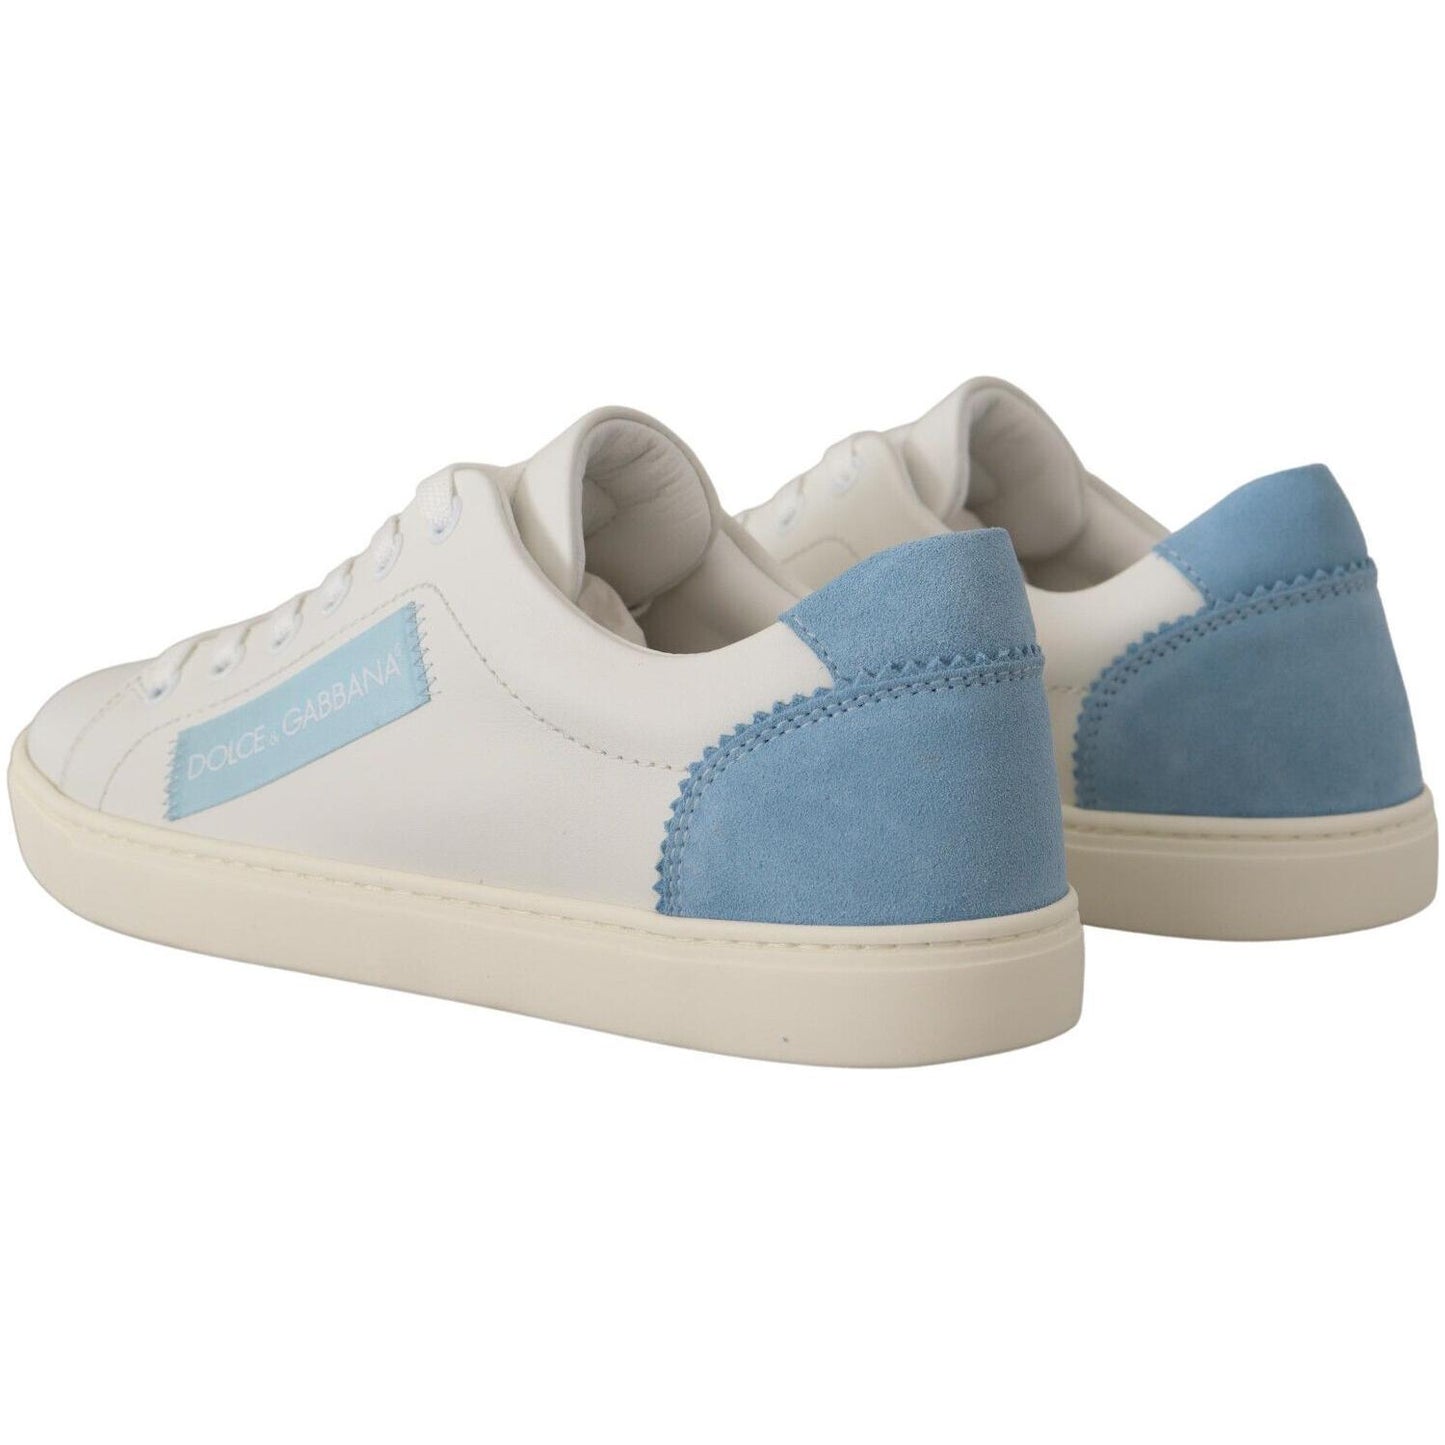 Dolce & Gabbana Exquisite Italian Leather Low-Top Sneakers white-blue-leather-low-top-sneakers-shoes